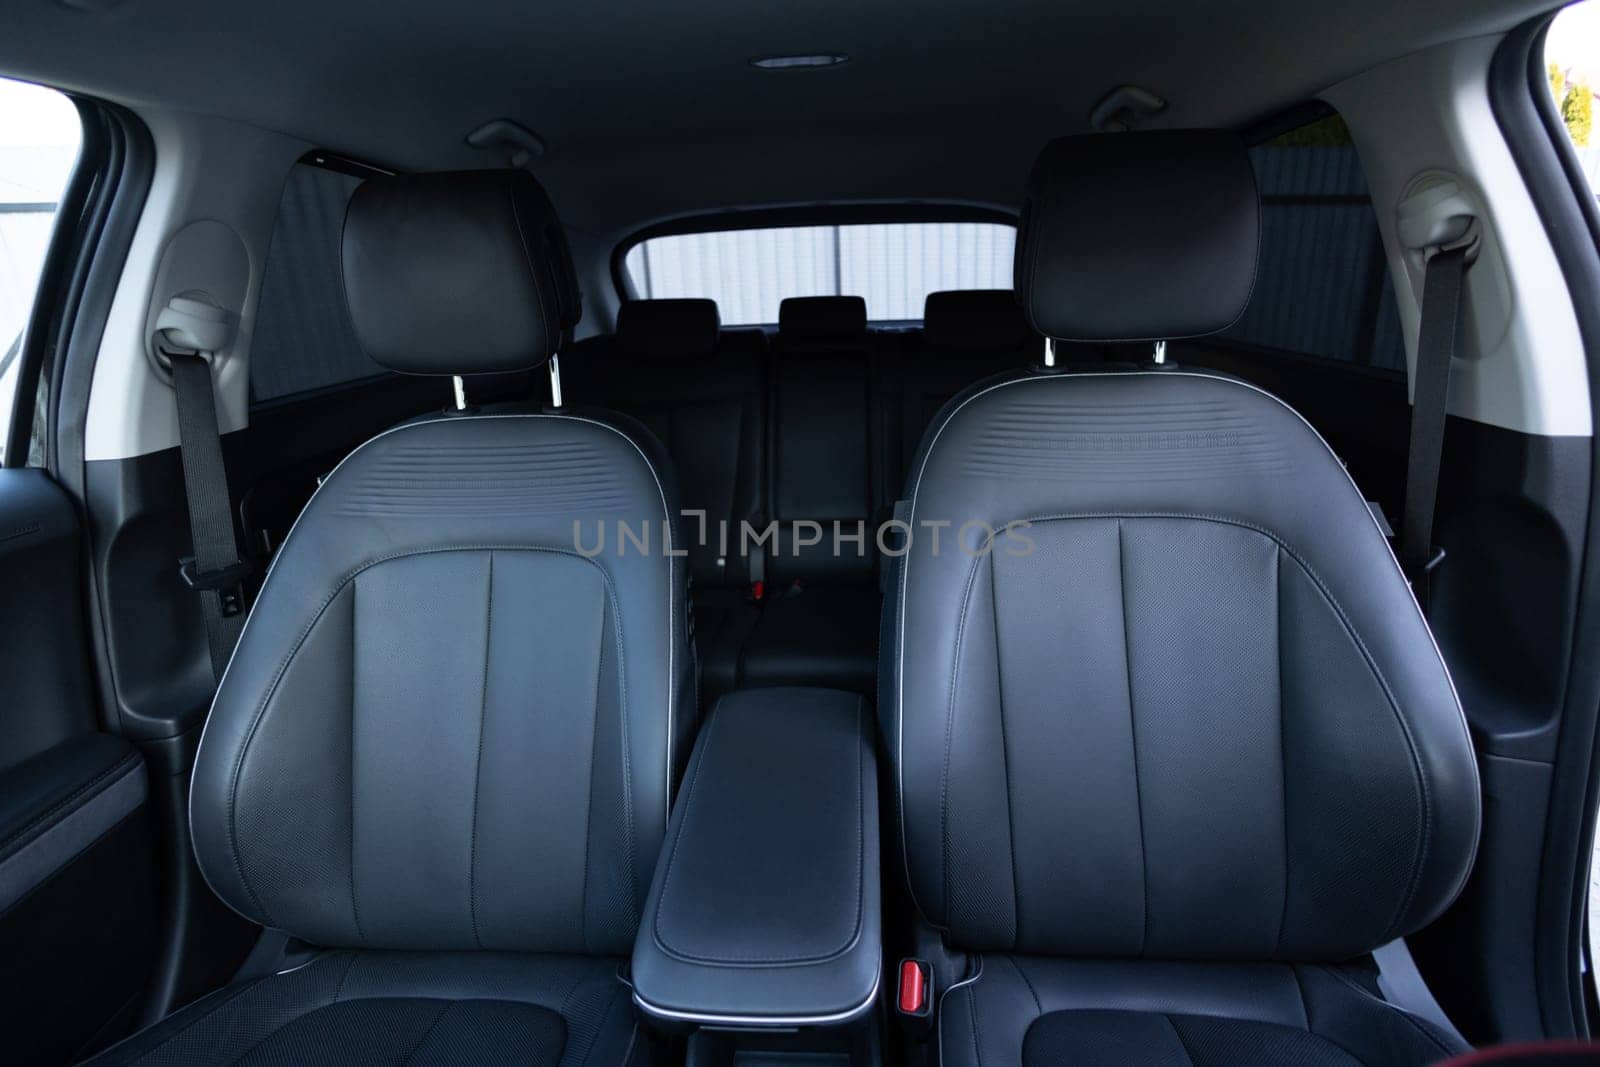 Luxury car leather seats. Interior of new modern clean expensive car. Passenger seats with leather. Closeup details. New car inside. Car cleaning theme.